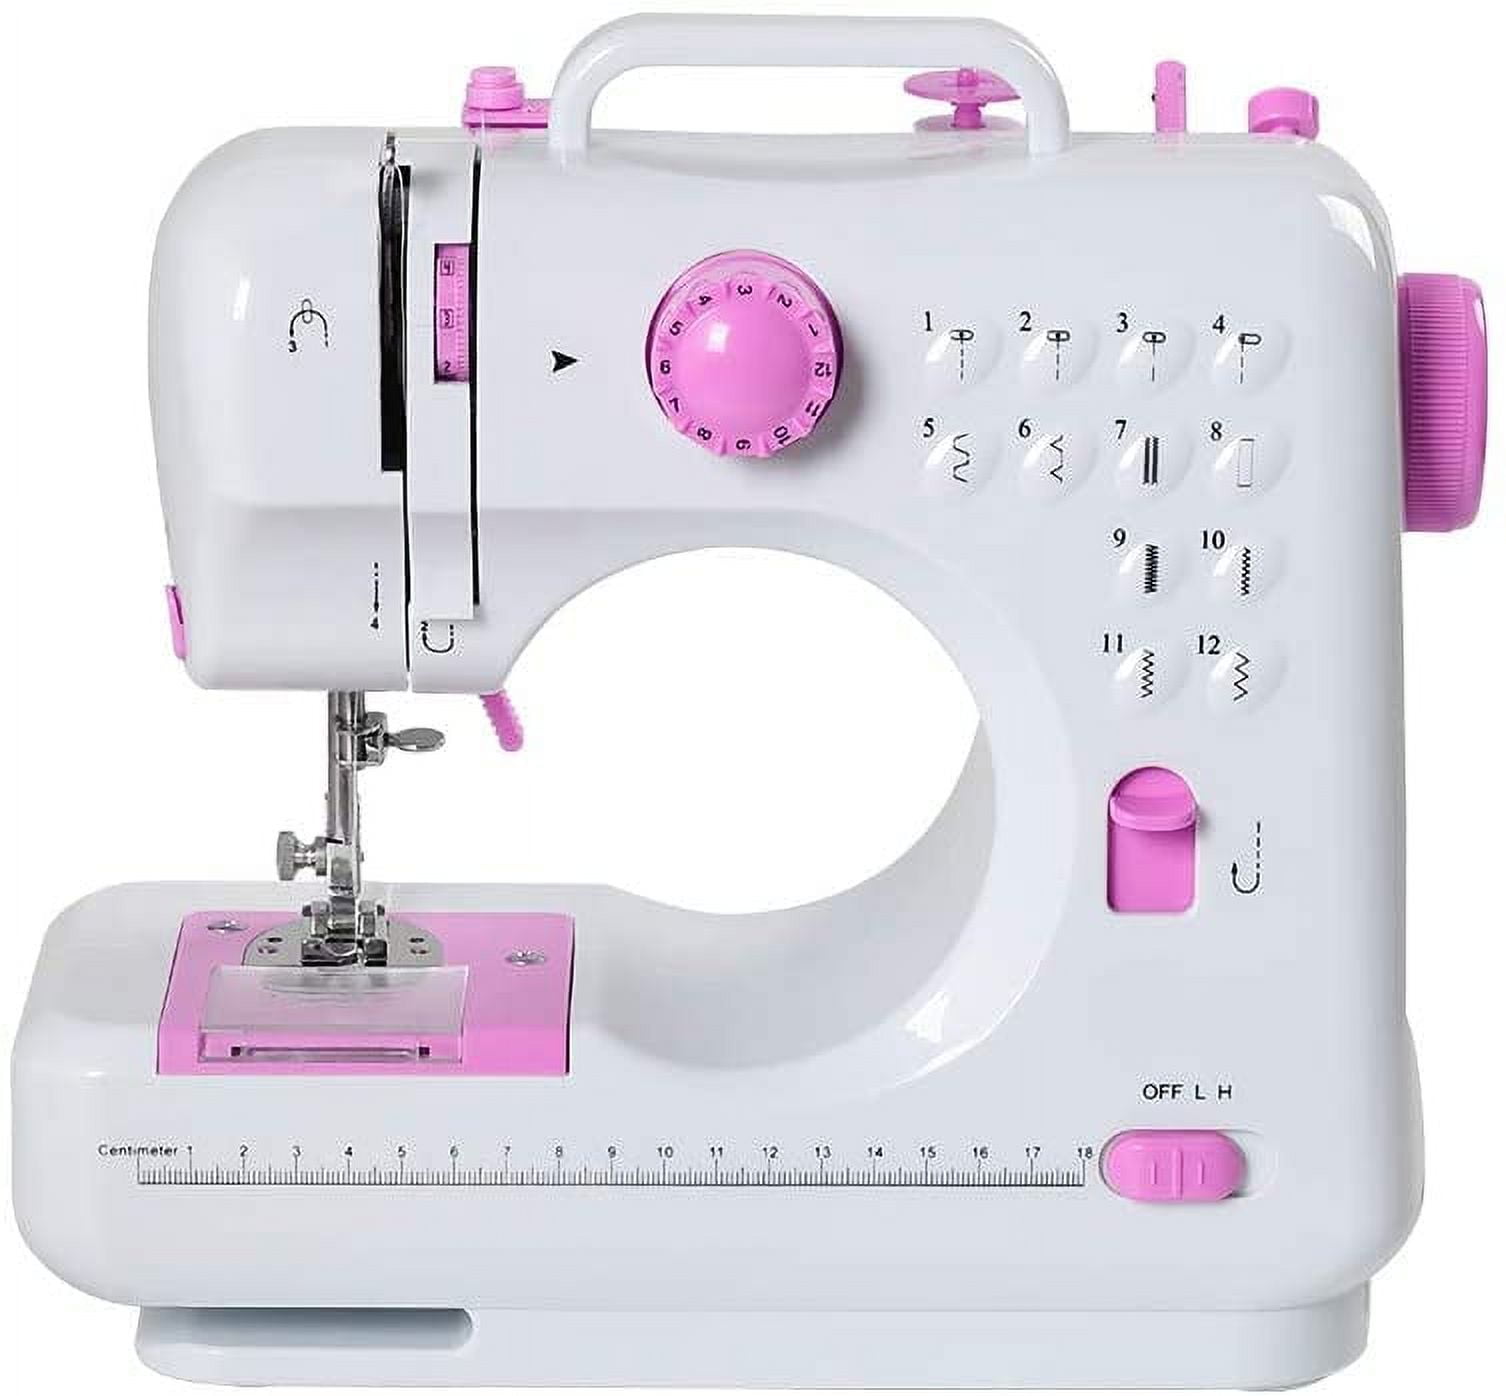  Sewing Machine for Beginners, Portable Mini Handheld Machine, 2  Speed Embroidery Stitching Machine, Foot Pedal Operation,Pink